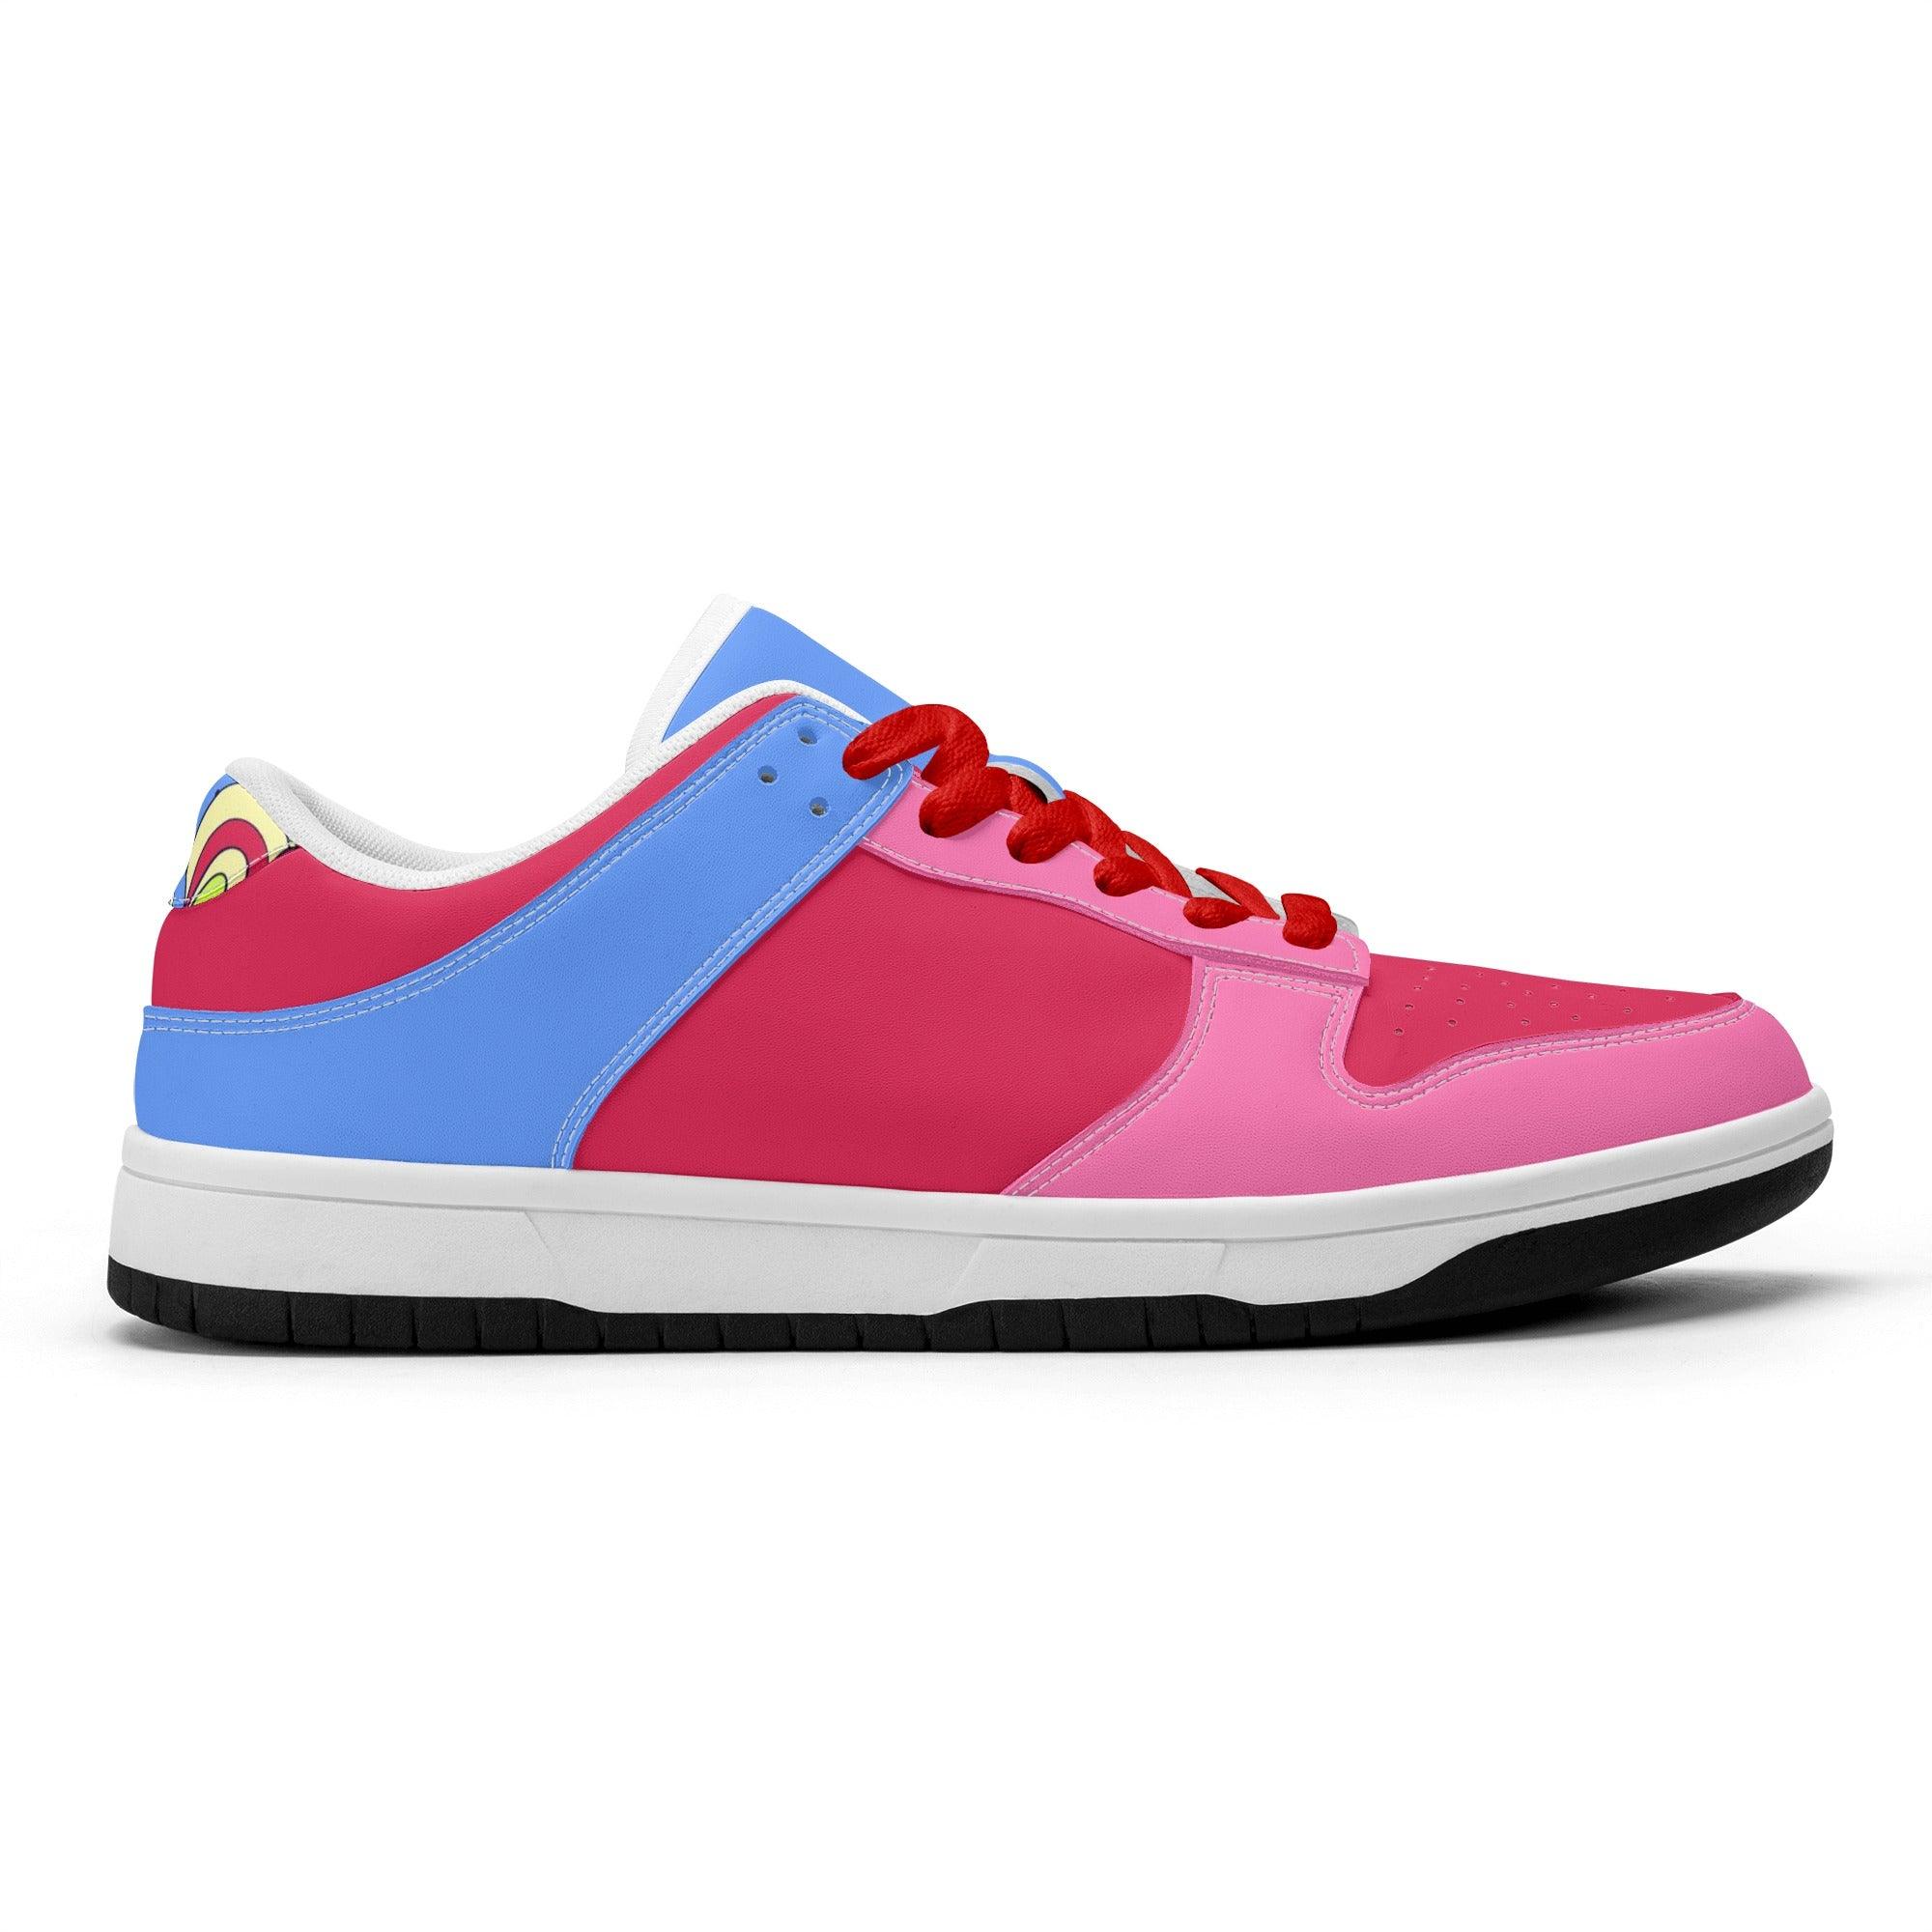 Sechia Tri-color Low Top Sneakers - Blissfully Brand